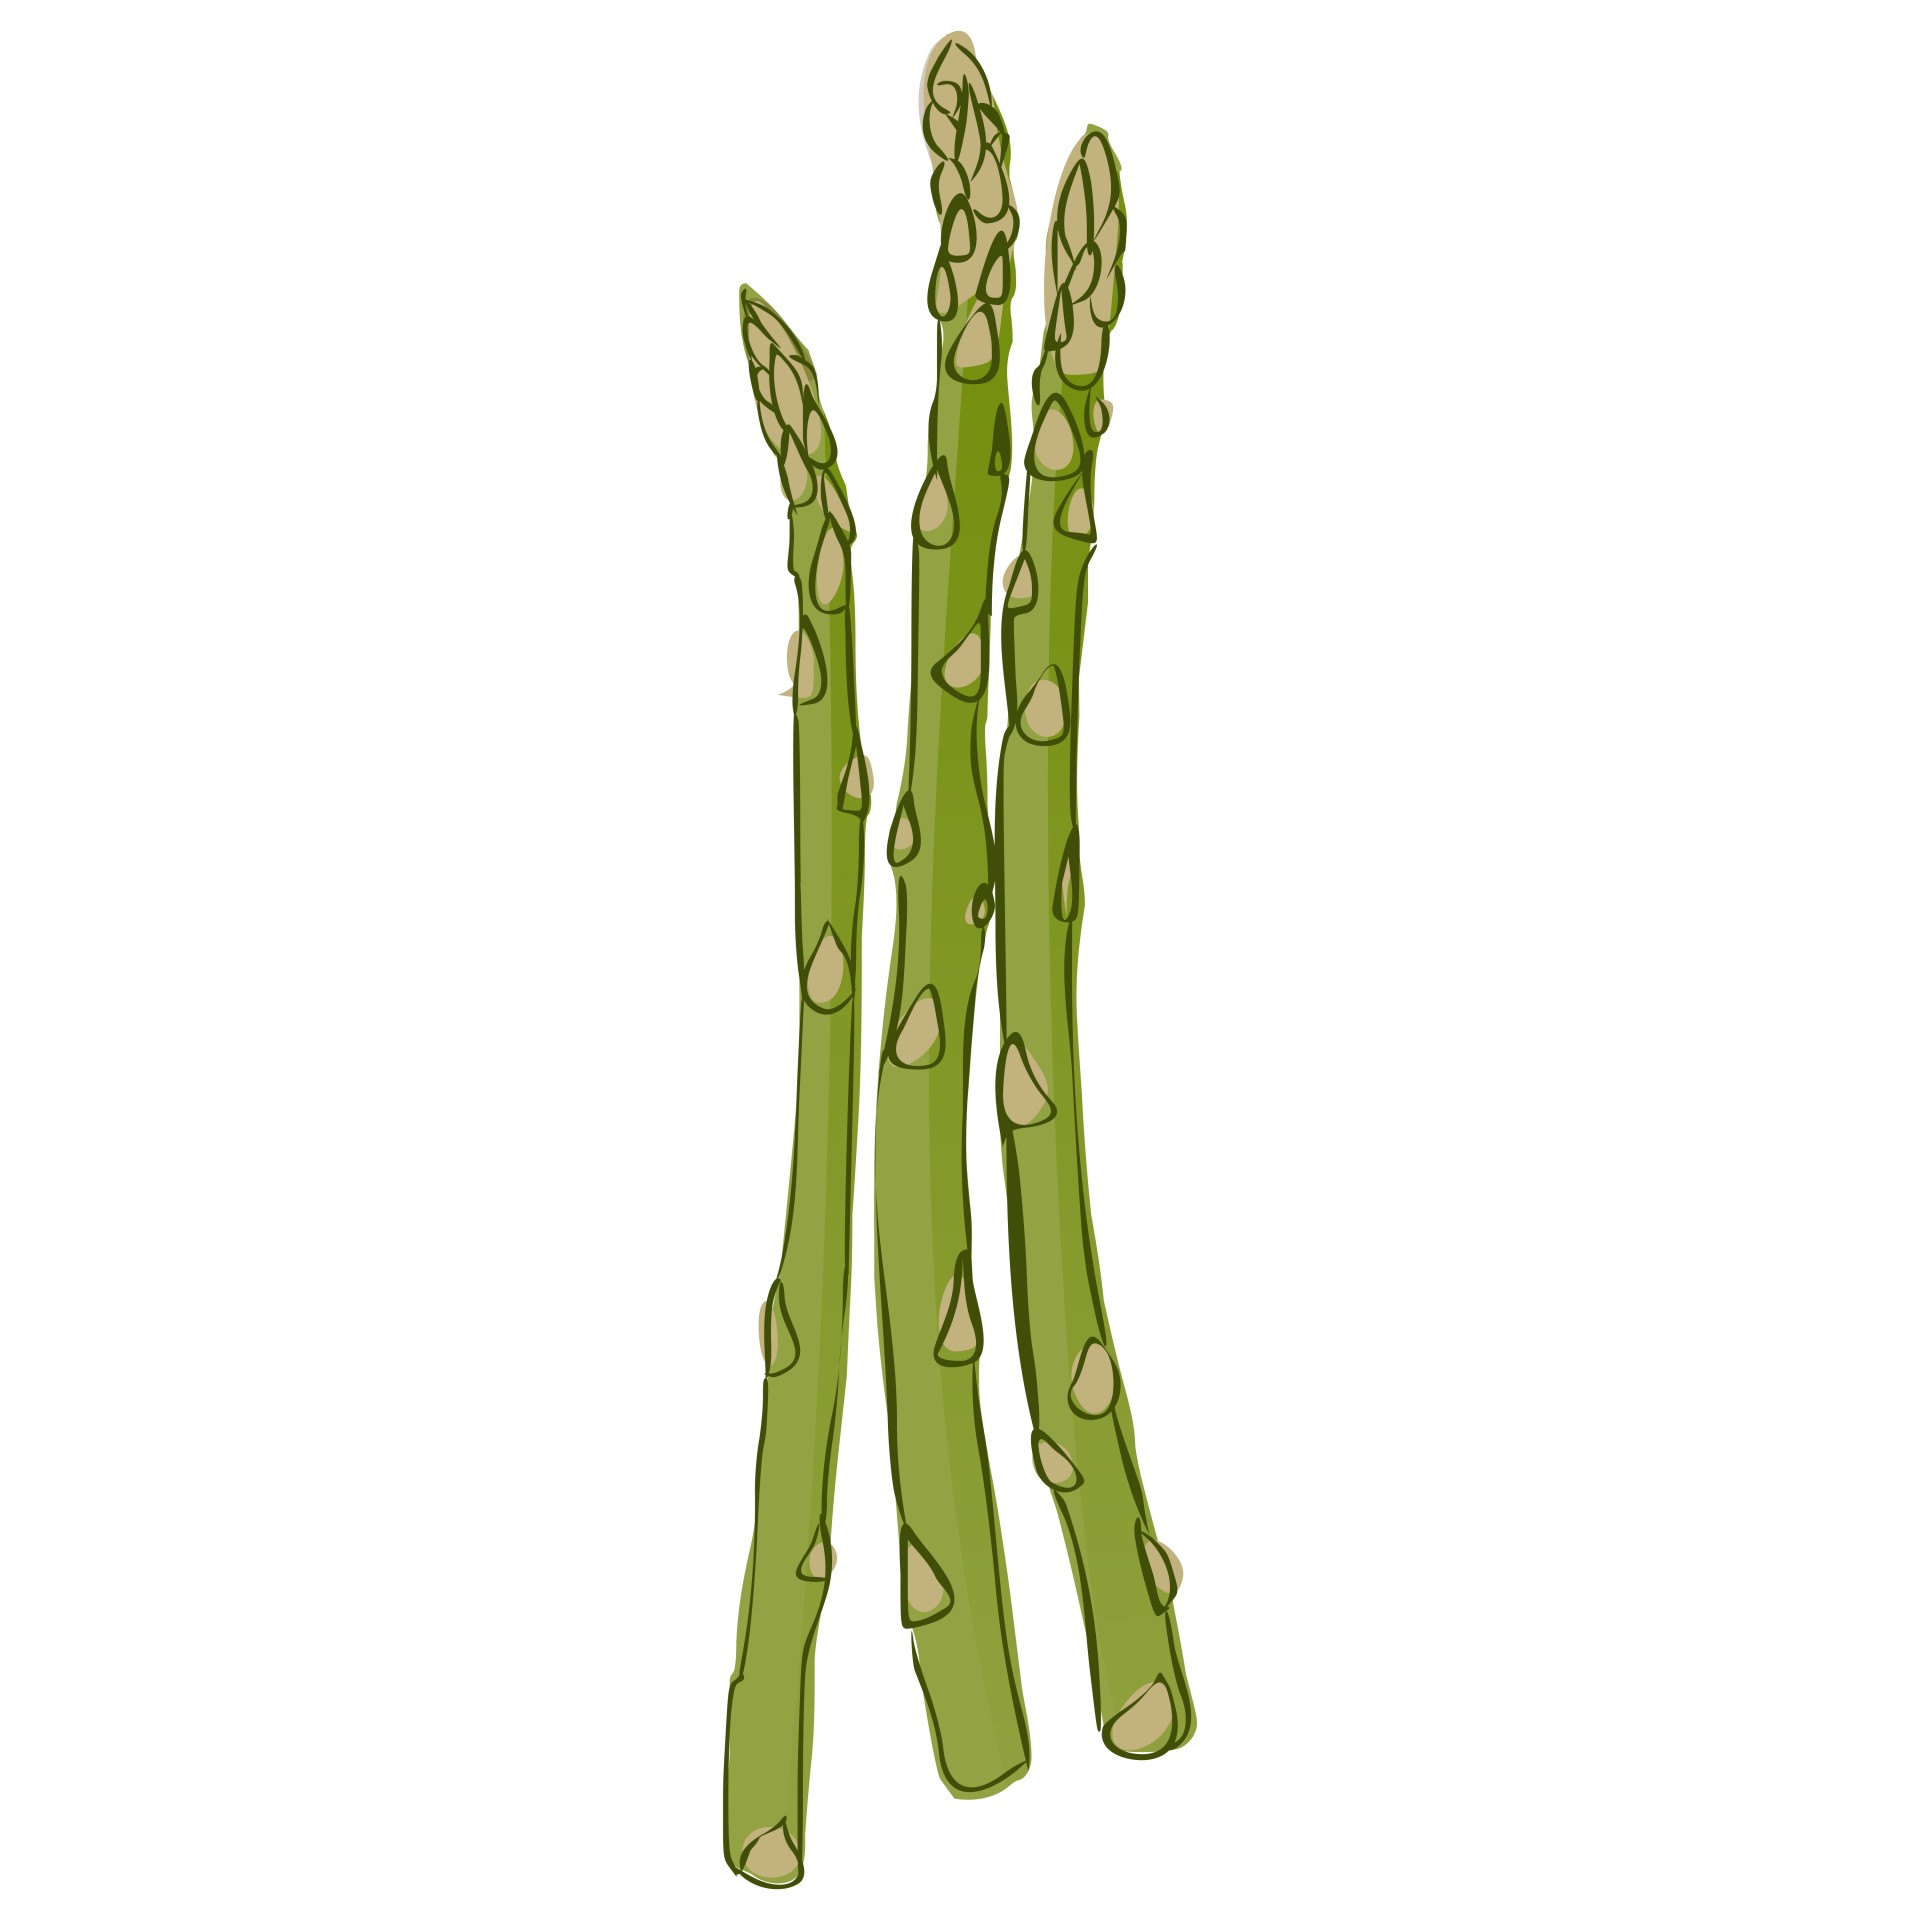 Asparagus Vector Design Images Asparagus Sprouts Drawn Sketch  Illustration Cook Engraving PNG Image For Free Download